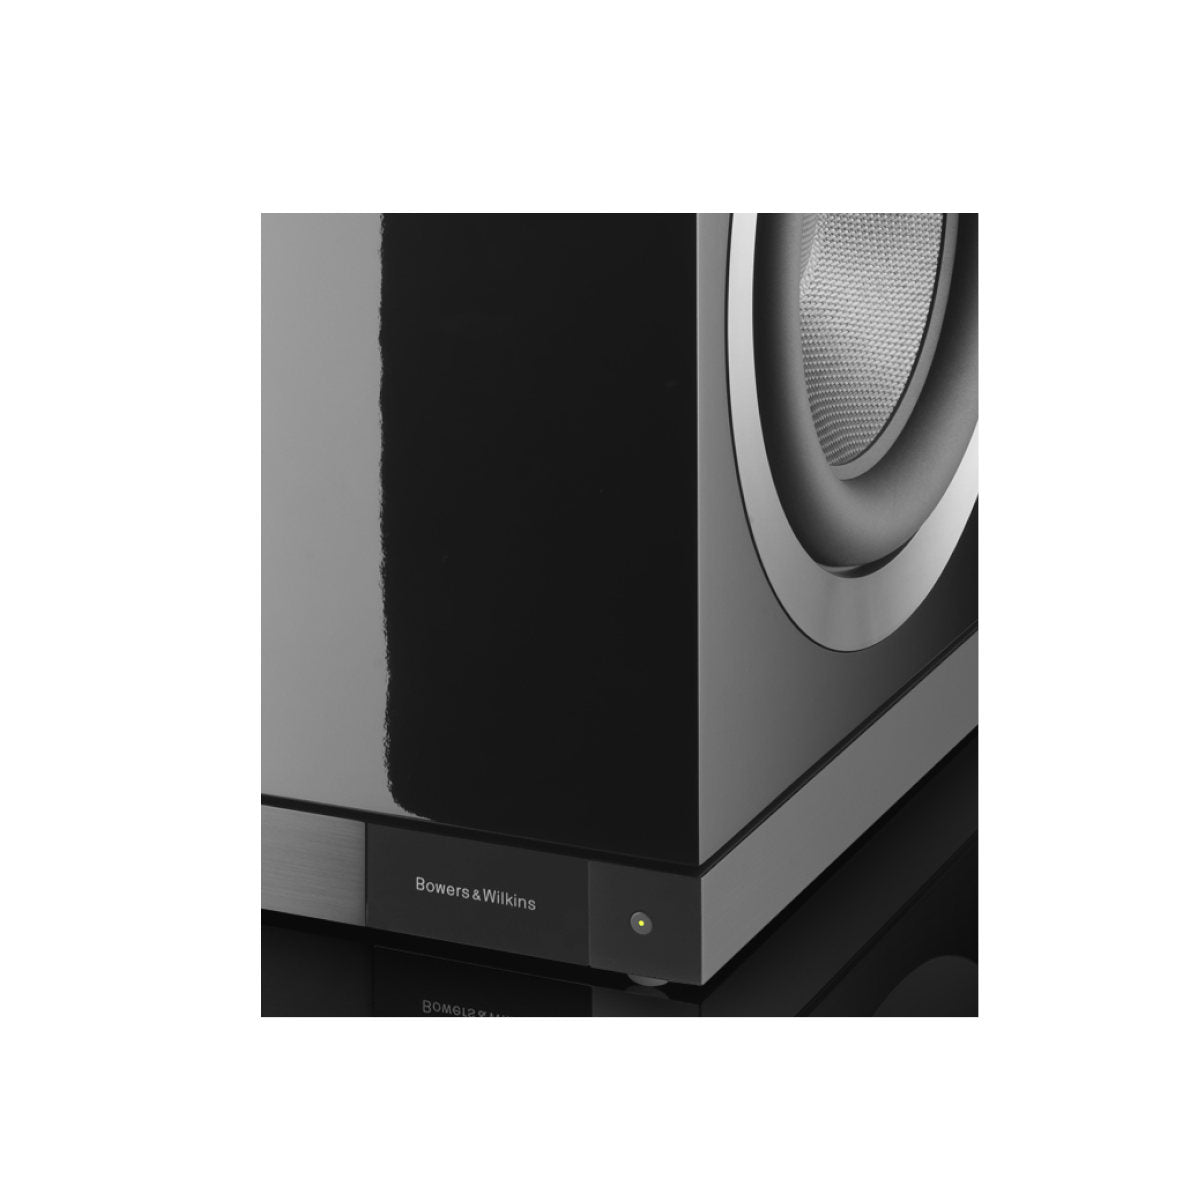 Bowers & Wilkins (B&W) DB2D Powered Subwoofer